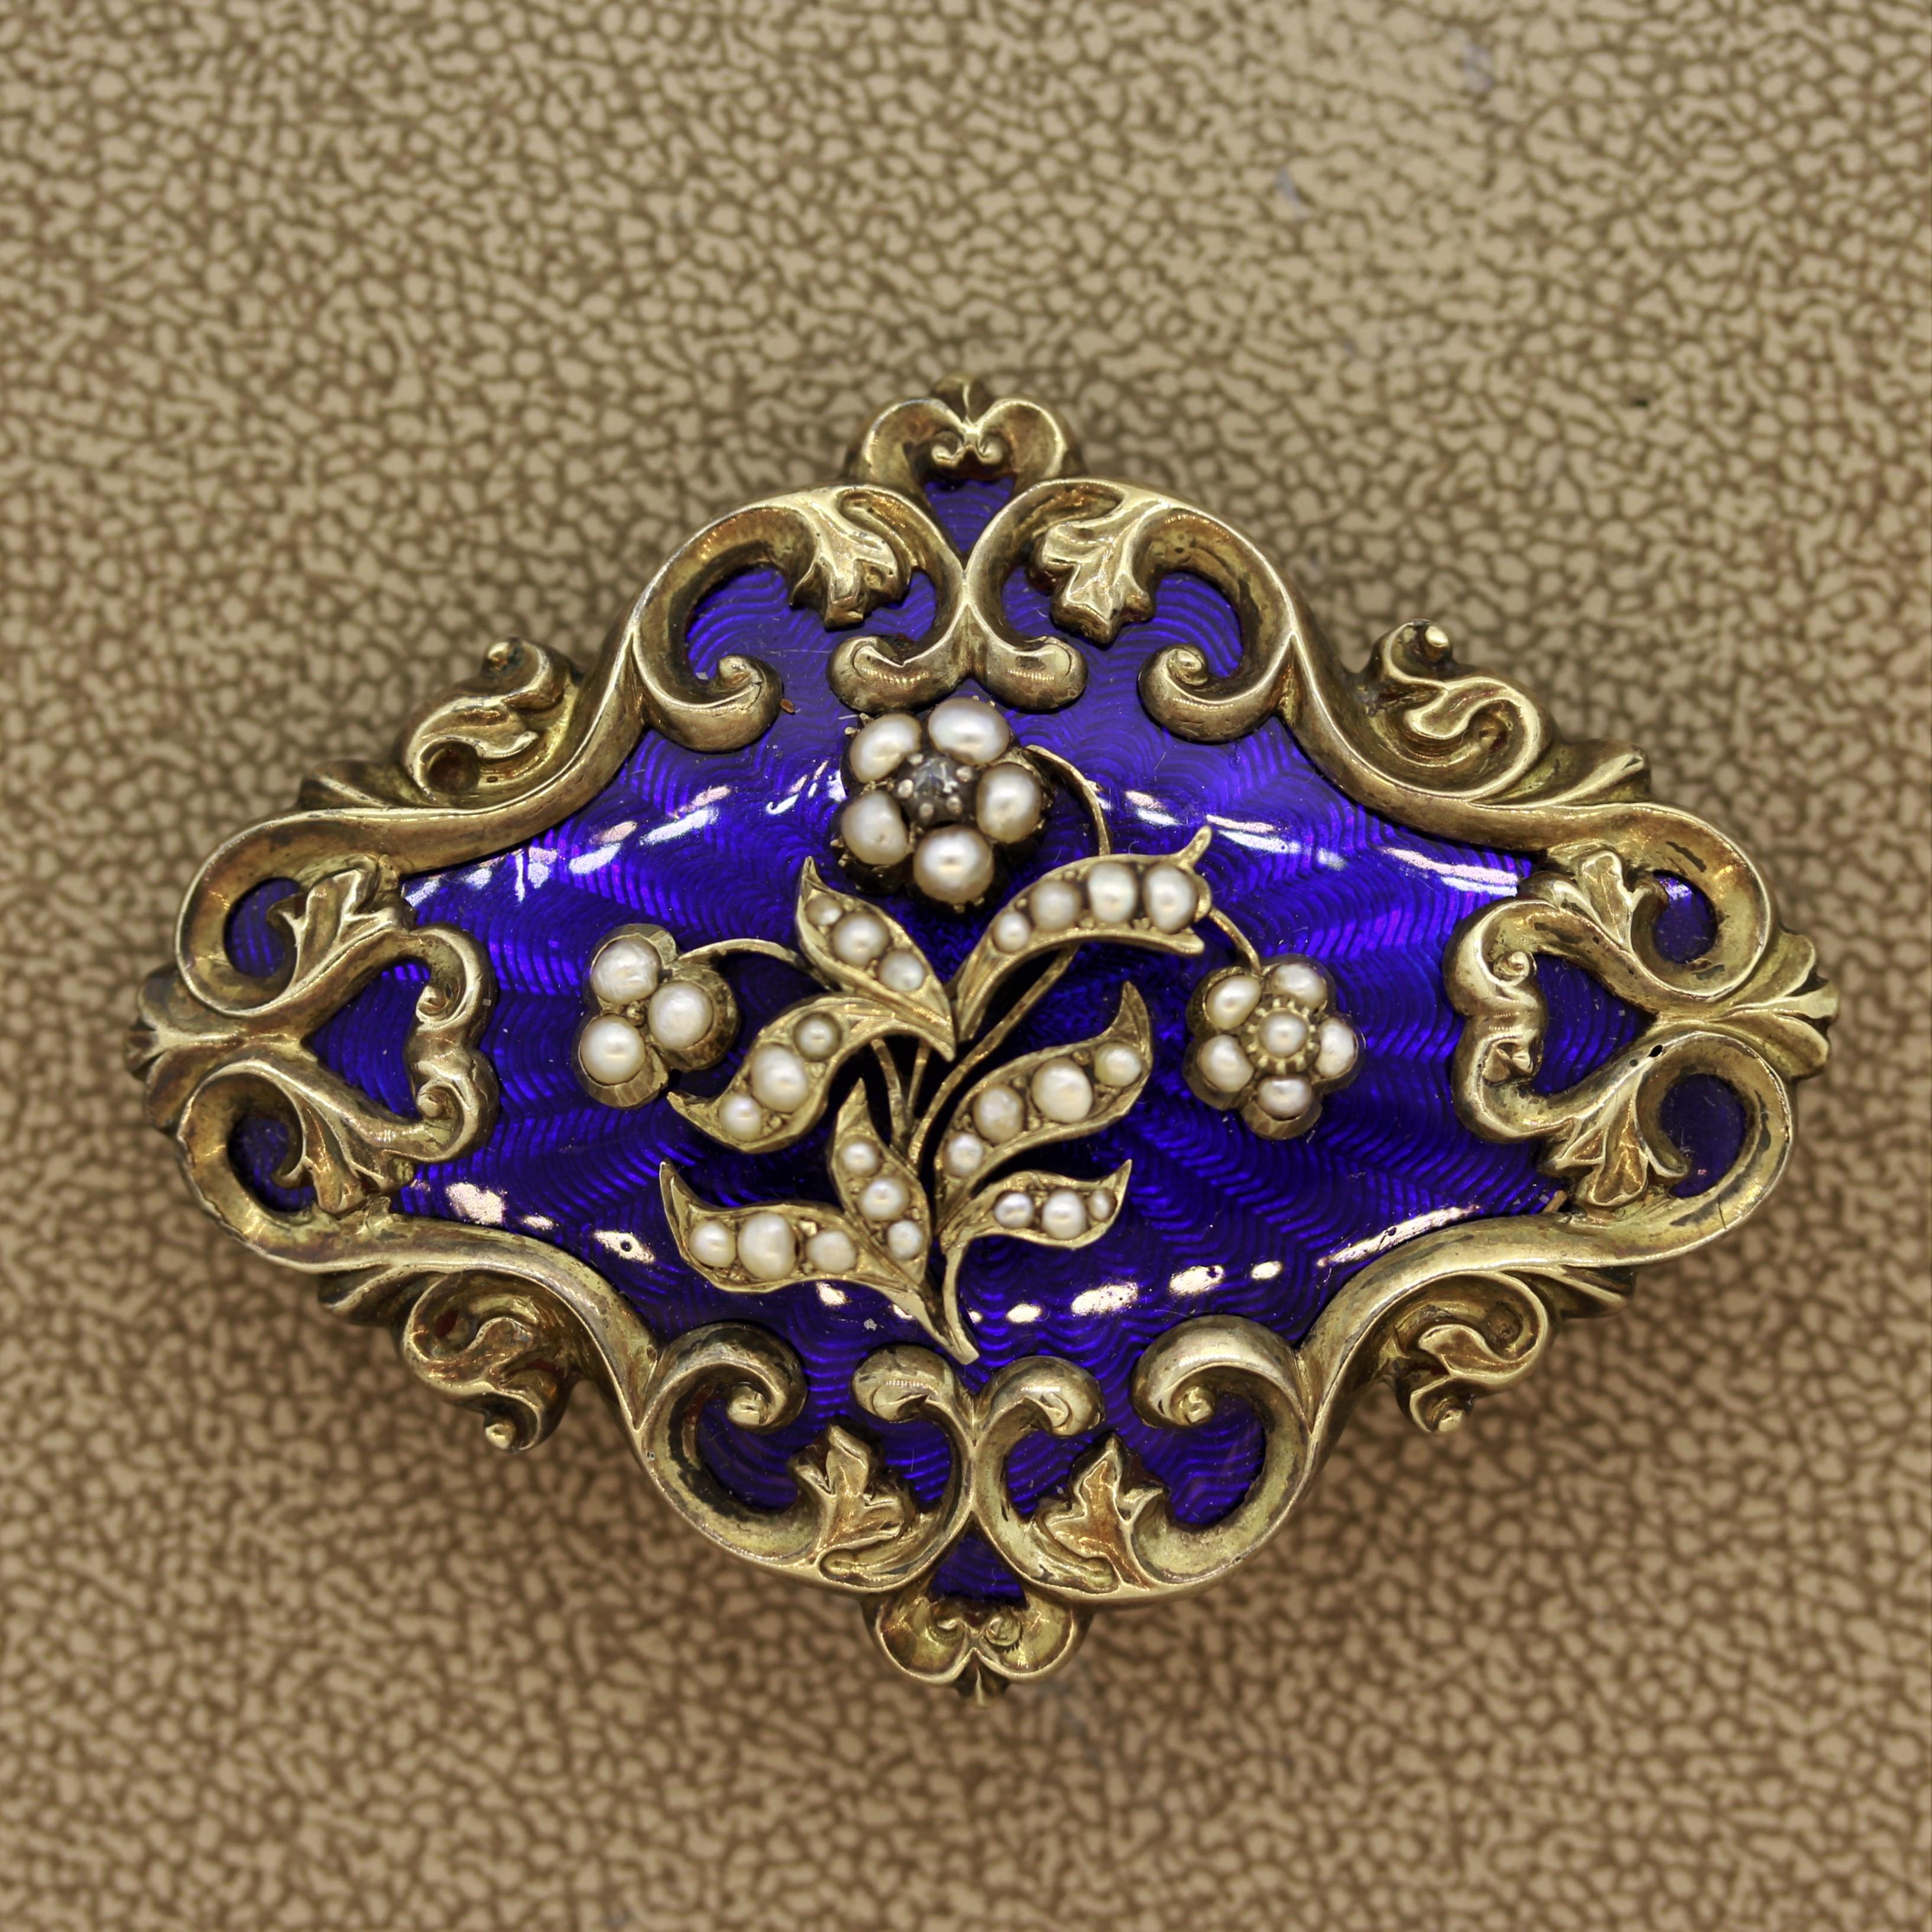 A finely made piece full of detail made in the 1880’s. This Victorian original features natural seed pearls set as flowers over hand painted guilloche enamel in a vivid blue color. It also has one small diamond set as the center of a flower. Made in